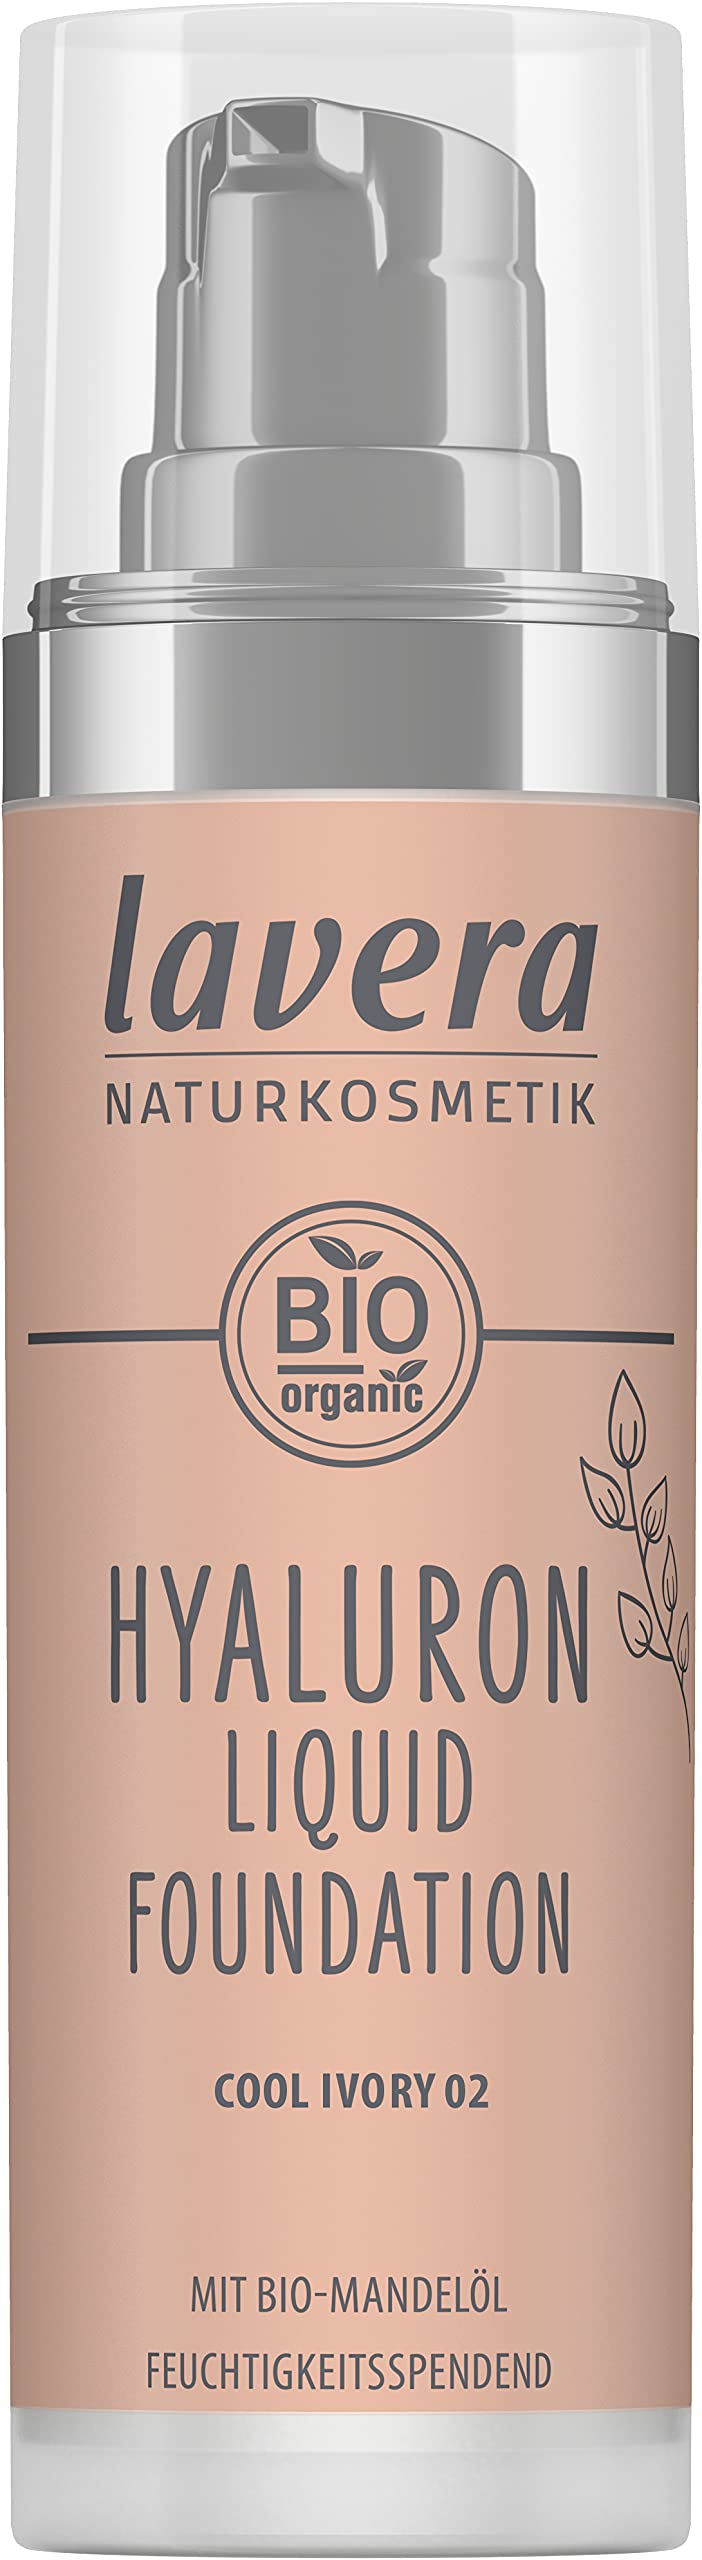 [Australia] - lavera Hyaluron Liquid Foundation - Natural Ivory 01 - natural cosmetics - Vegan - Silky, lightweight texture - free from mineraloil - Natural hyaluronic acid & Organic almond oil - 30ml 